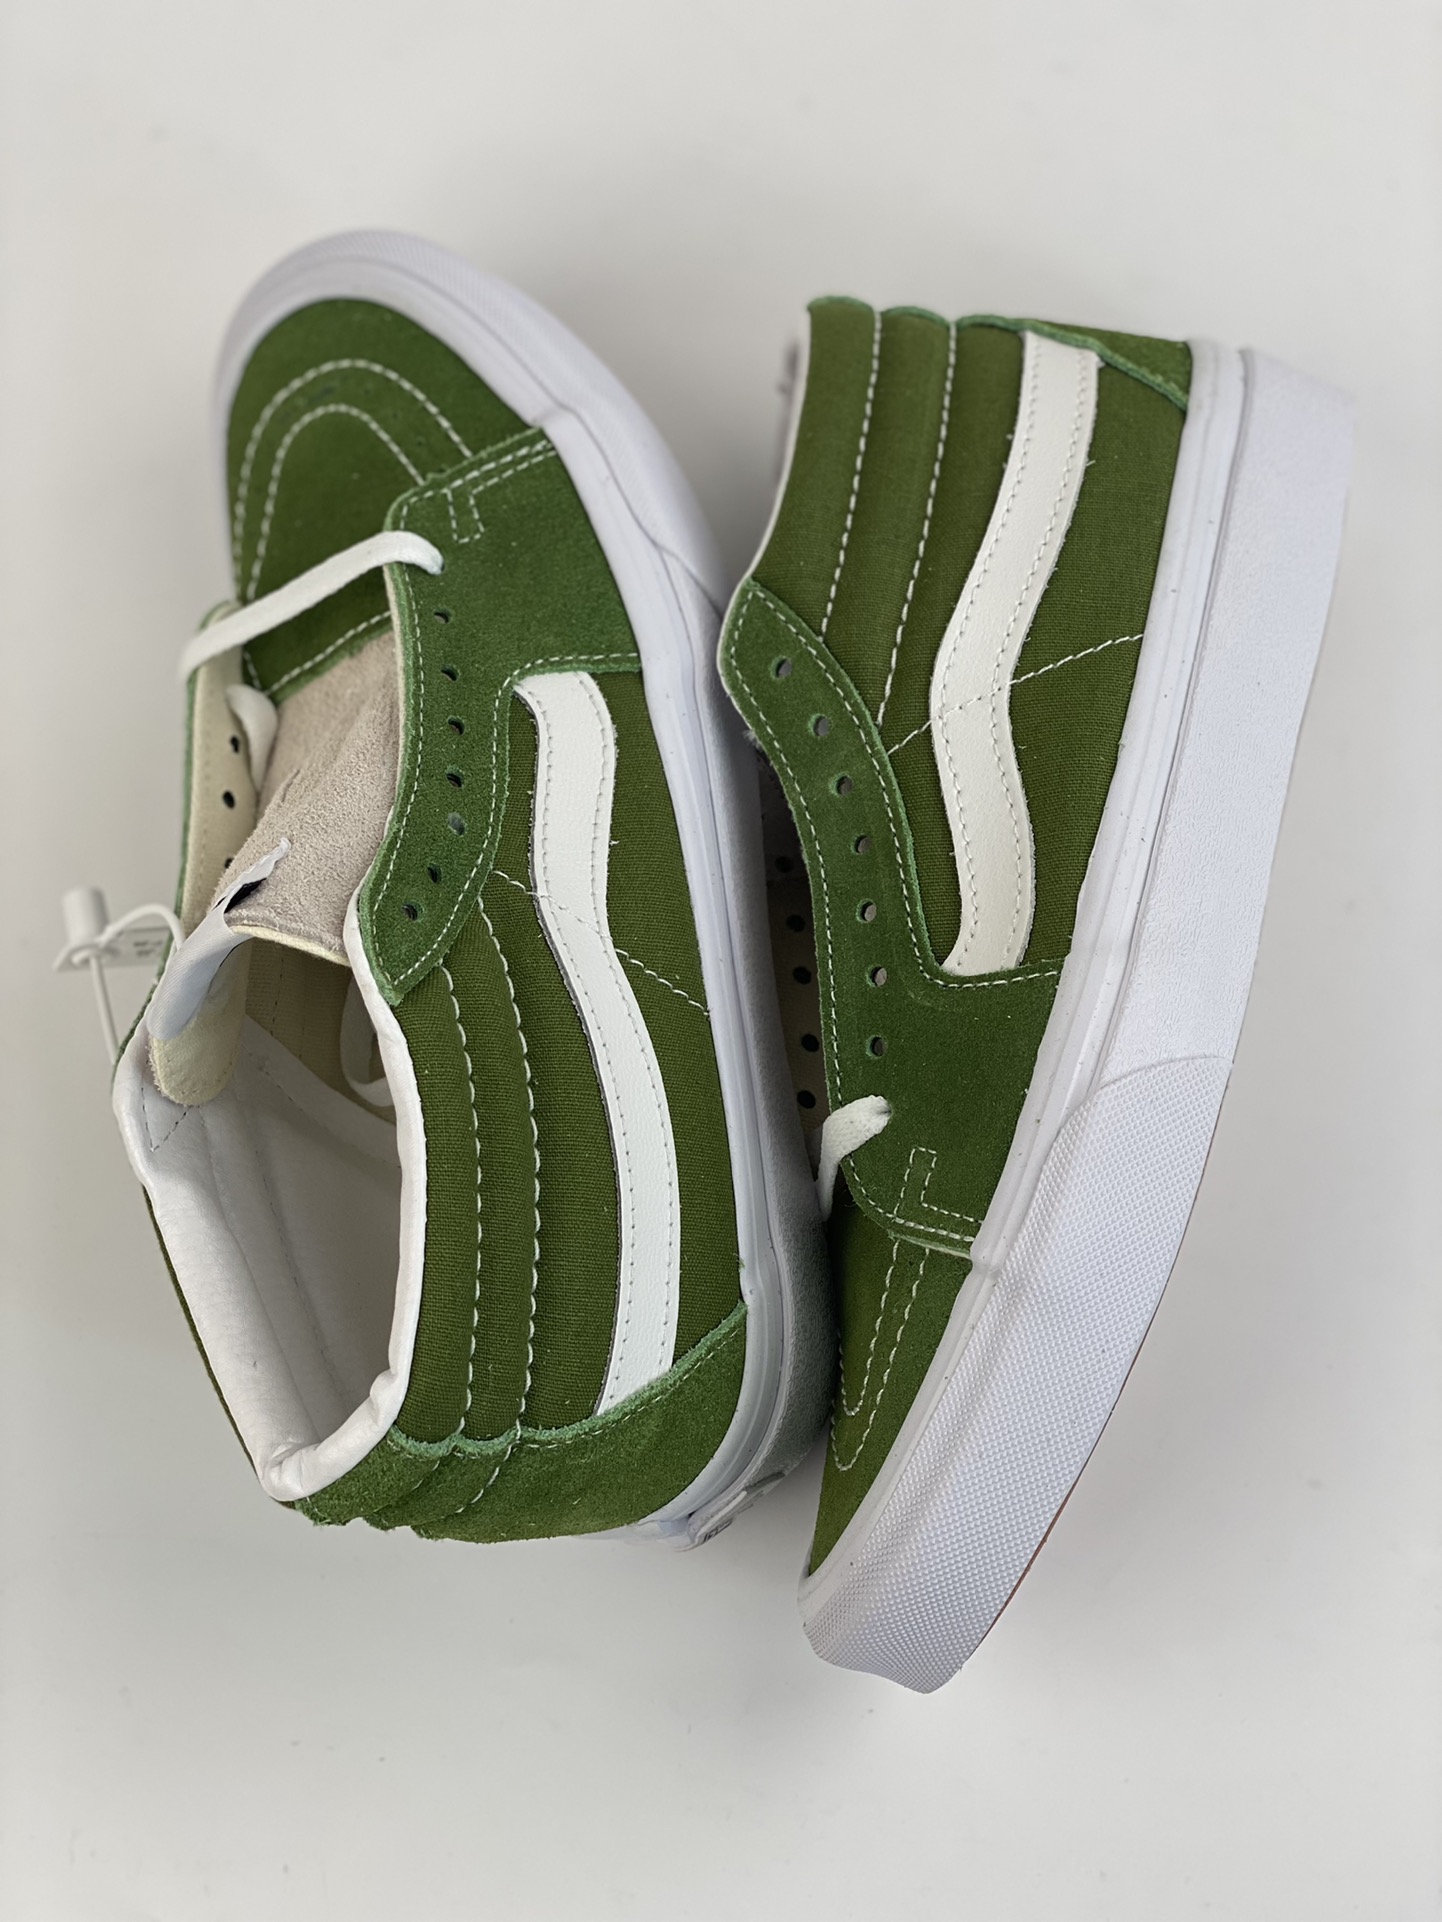 VANS SK8-MID Matcha Green mid-top is made of high-quality suede + canvas material VN0A3WM3609